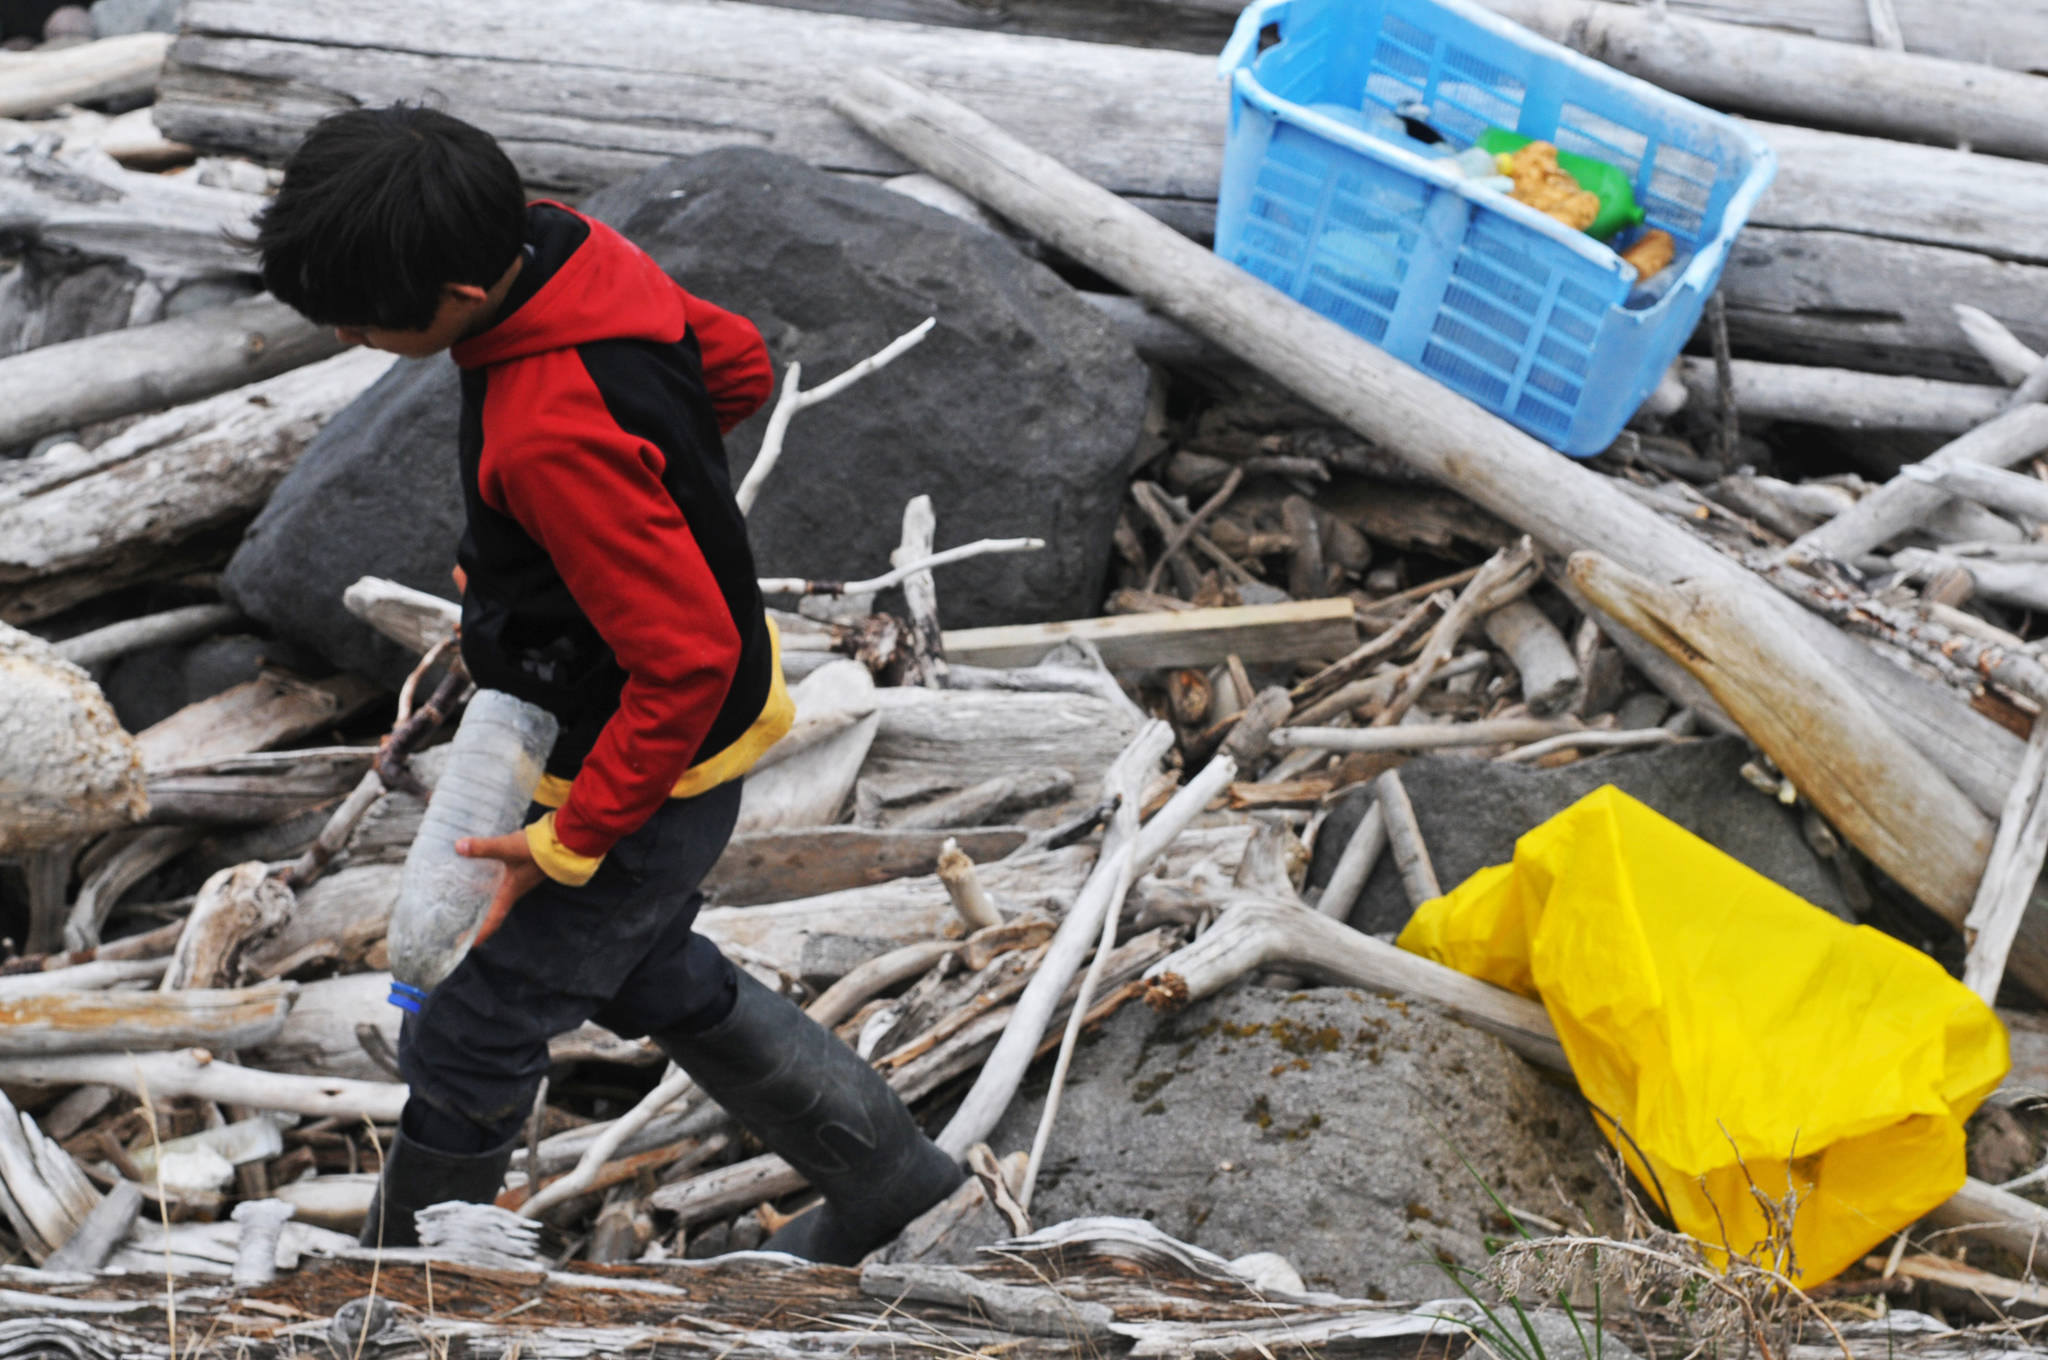 Gautoma Iwamura, a homeschool student through the Kenai Peninsula Borough School District’s Connections program, gathers trash on Sunday, June 4, 2017 on Augustine Island, Alaska. Iwamura was one of a group of students and adults who traveled with the Center for Alaskan Coastal Studies to the remote island in Cook Inlet to gather marine debris from the beaches. (Photo by Elizabeth Earl/Peninsula Clarion)